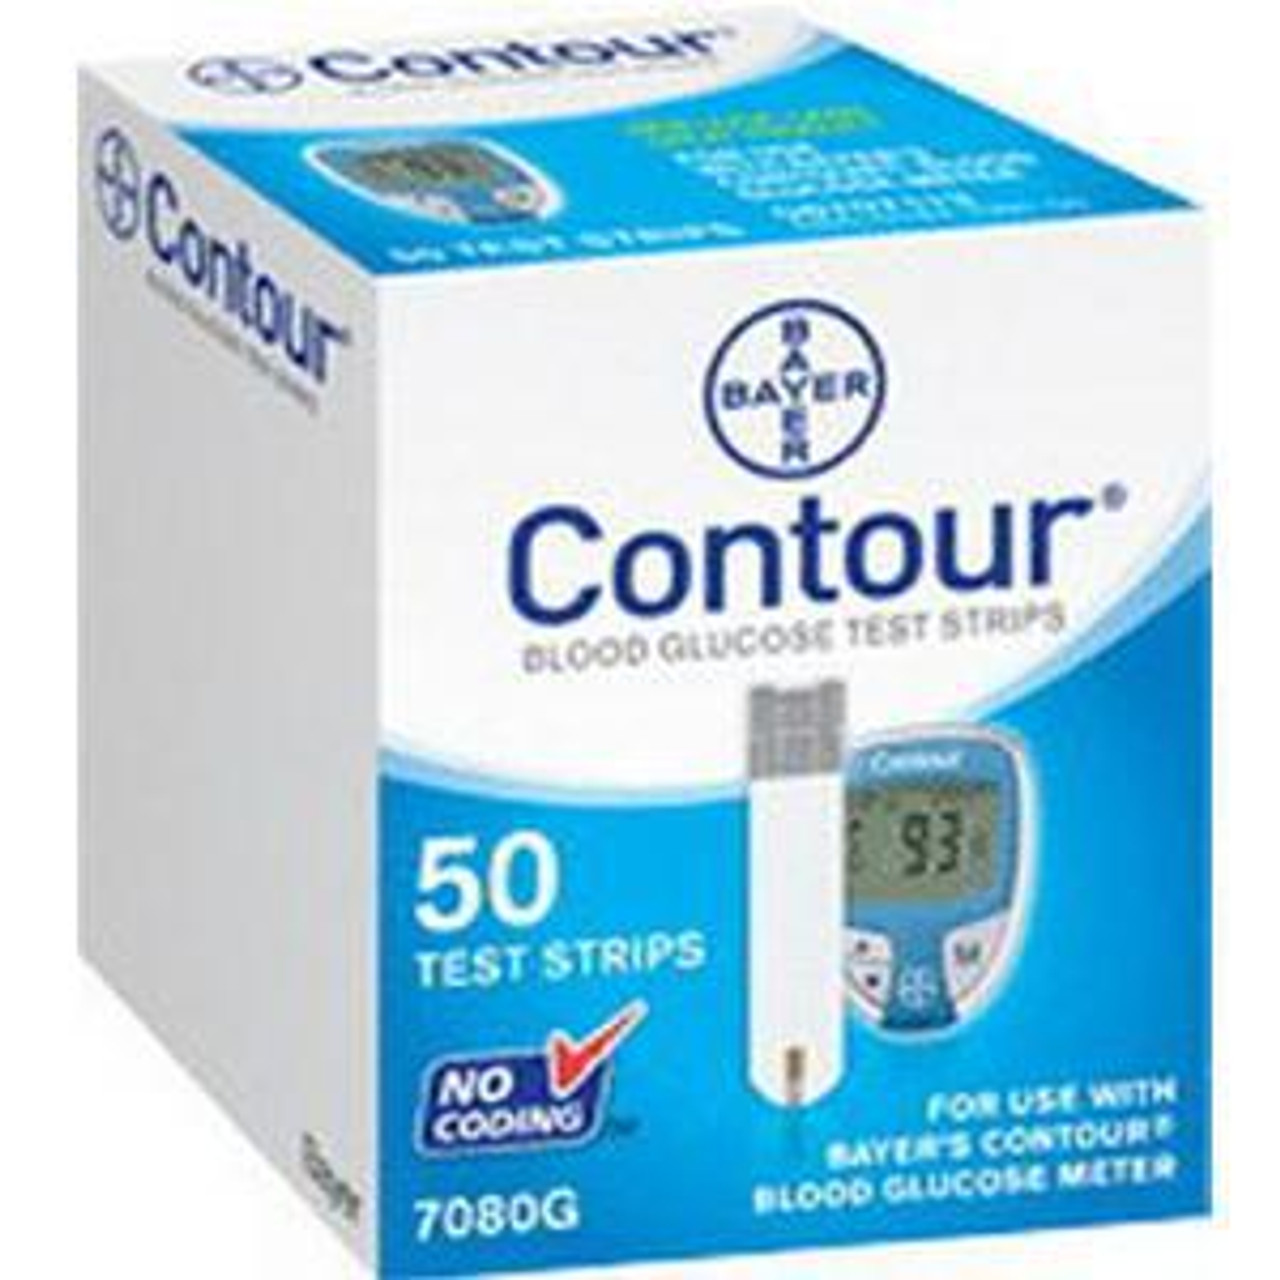 Contour Next One Blood Glucose Monitoring System, Diabetic Aids &  Nutrition